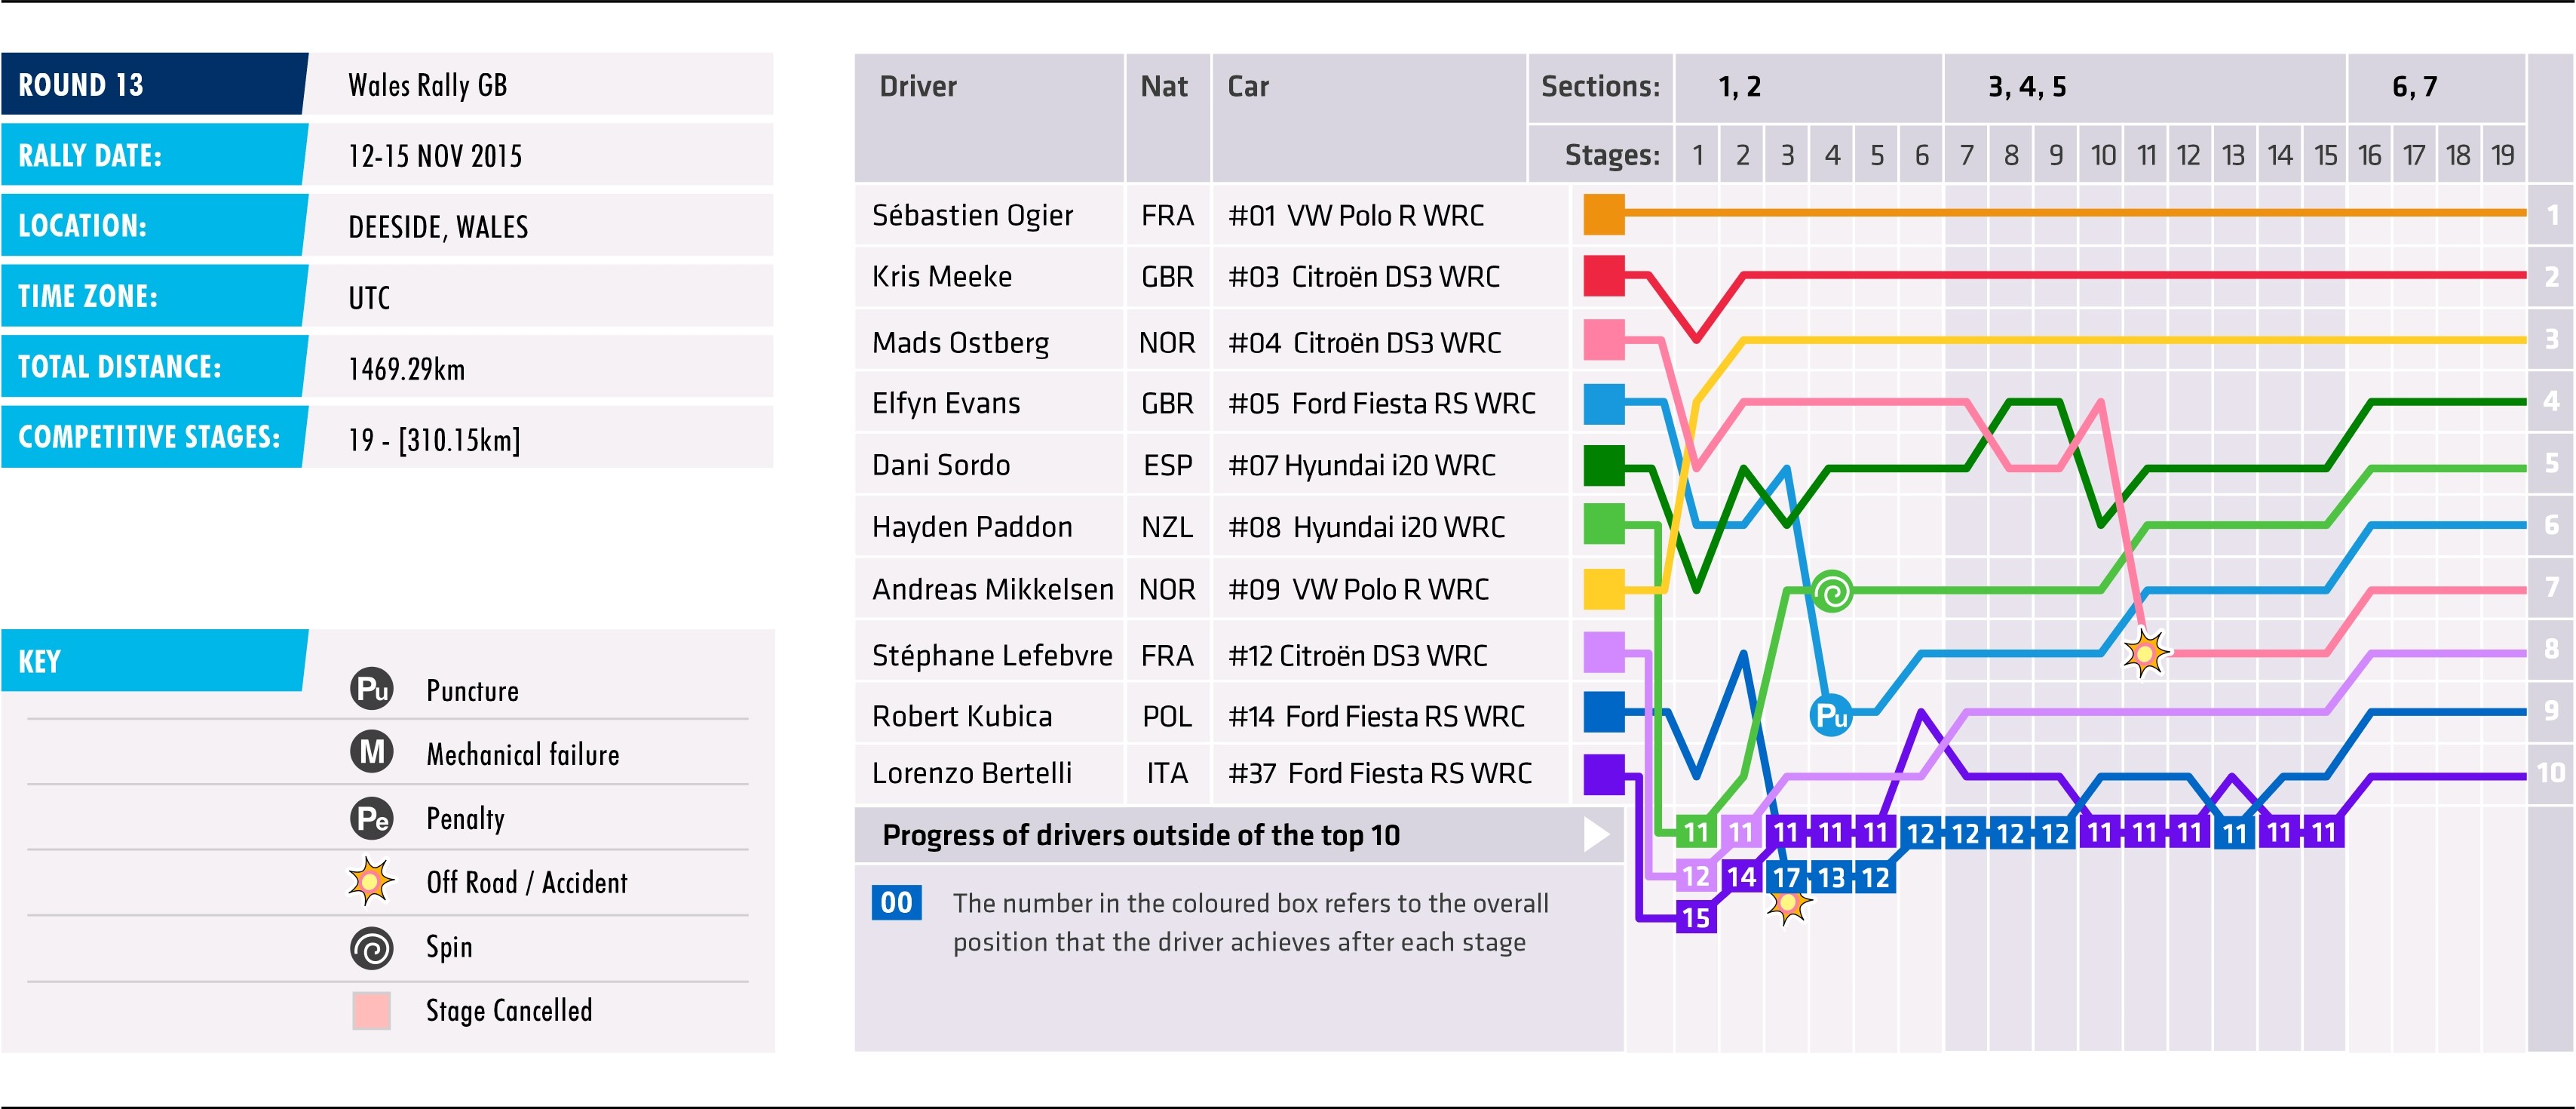 2015 Wales Rally GB - Stage Chart